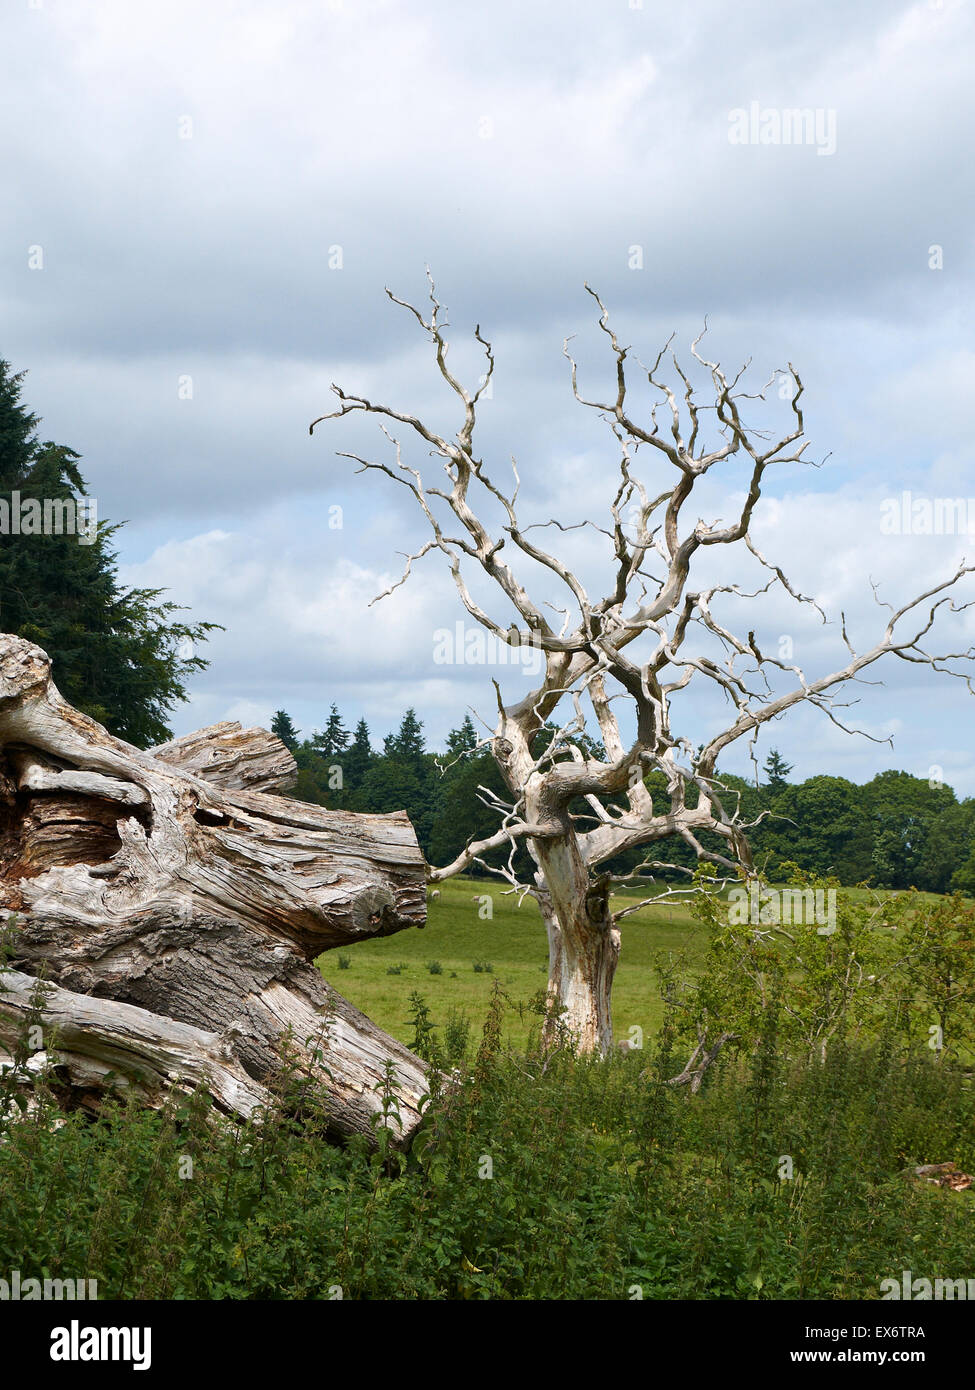 Dead Oak tree in the grounds of Chirk Castle Wrexham Wales UK Stock Photo